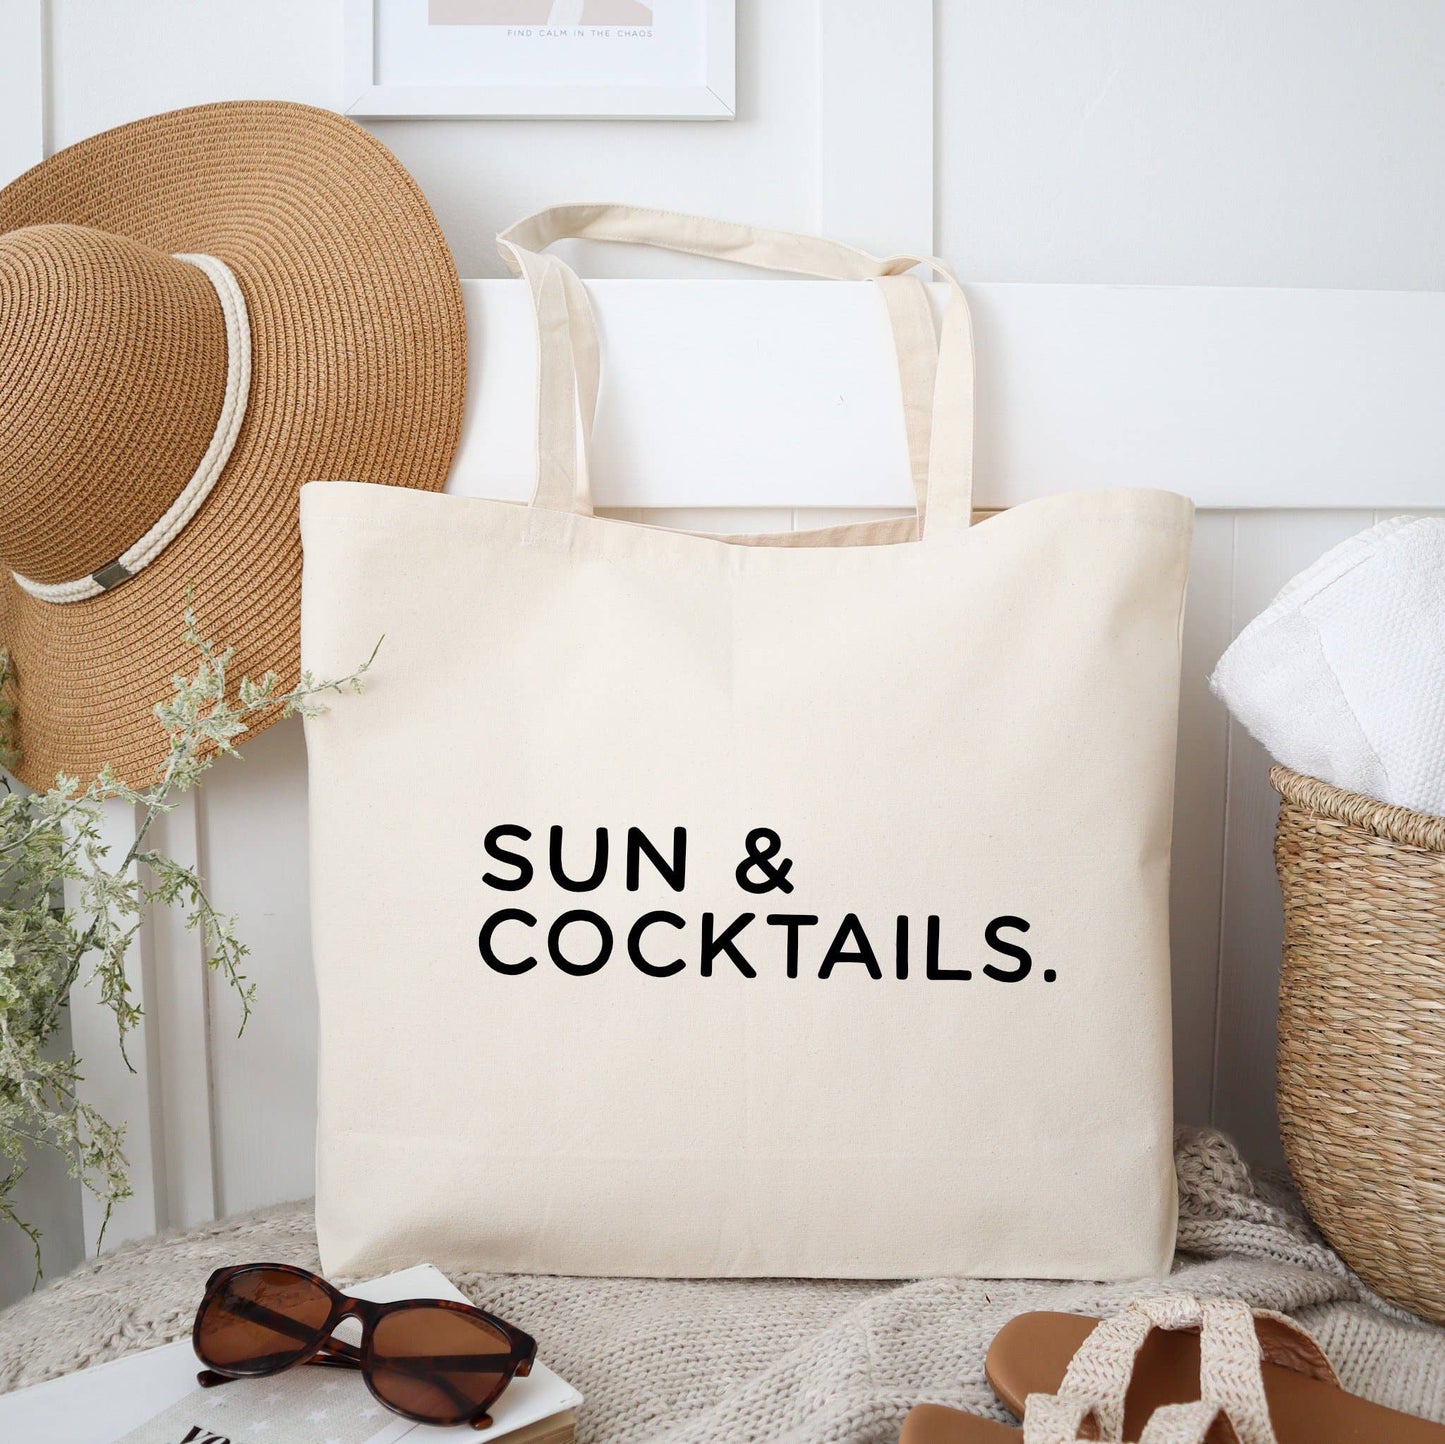 Sun & Cocktails Holiday Tote Bag